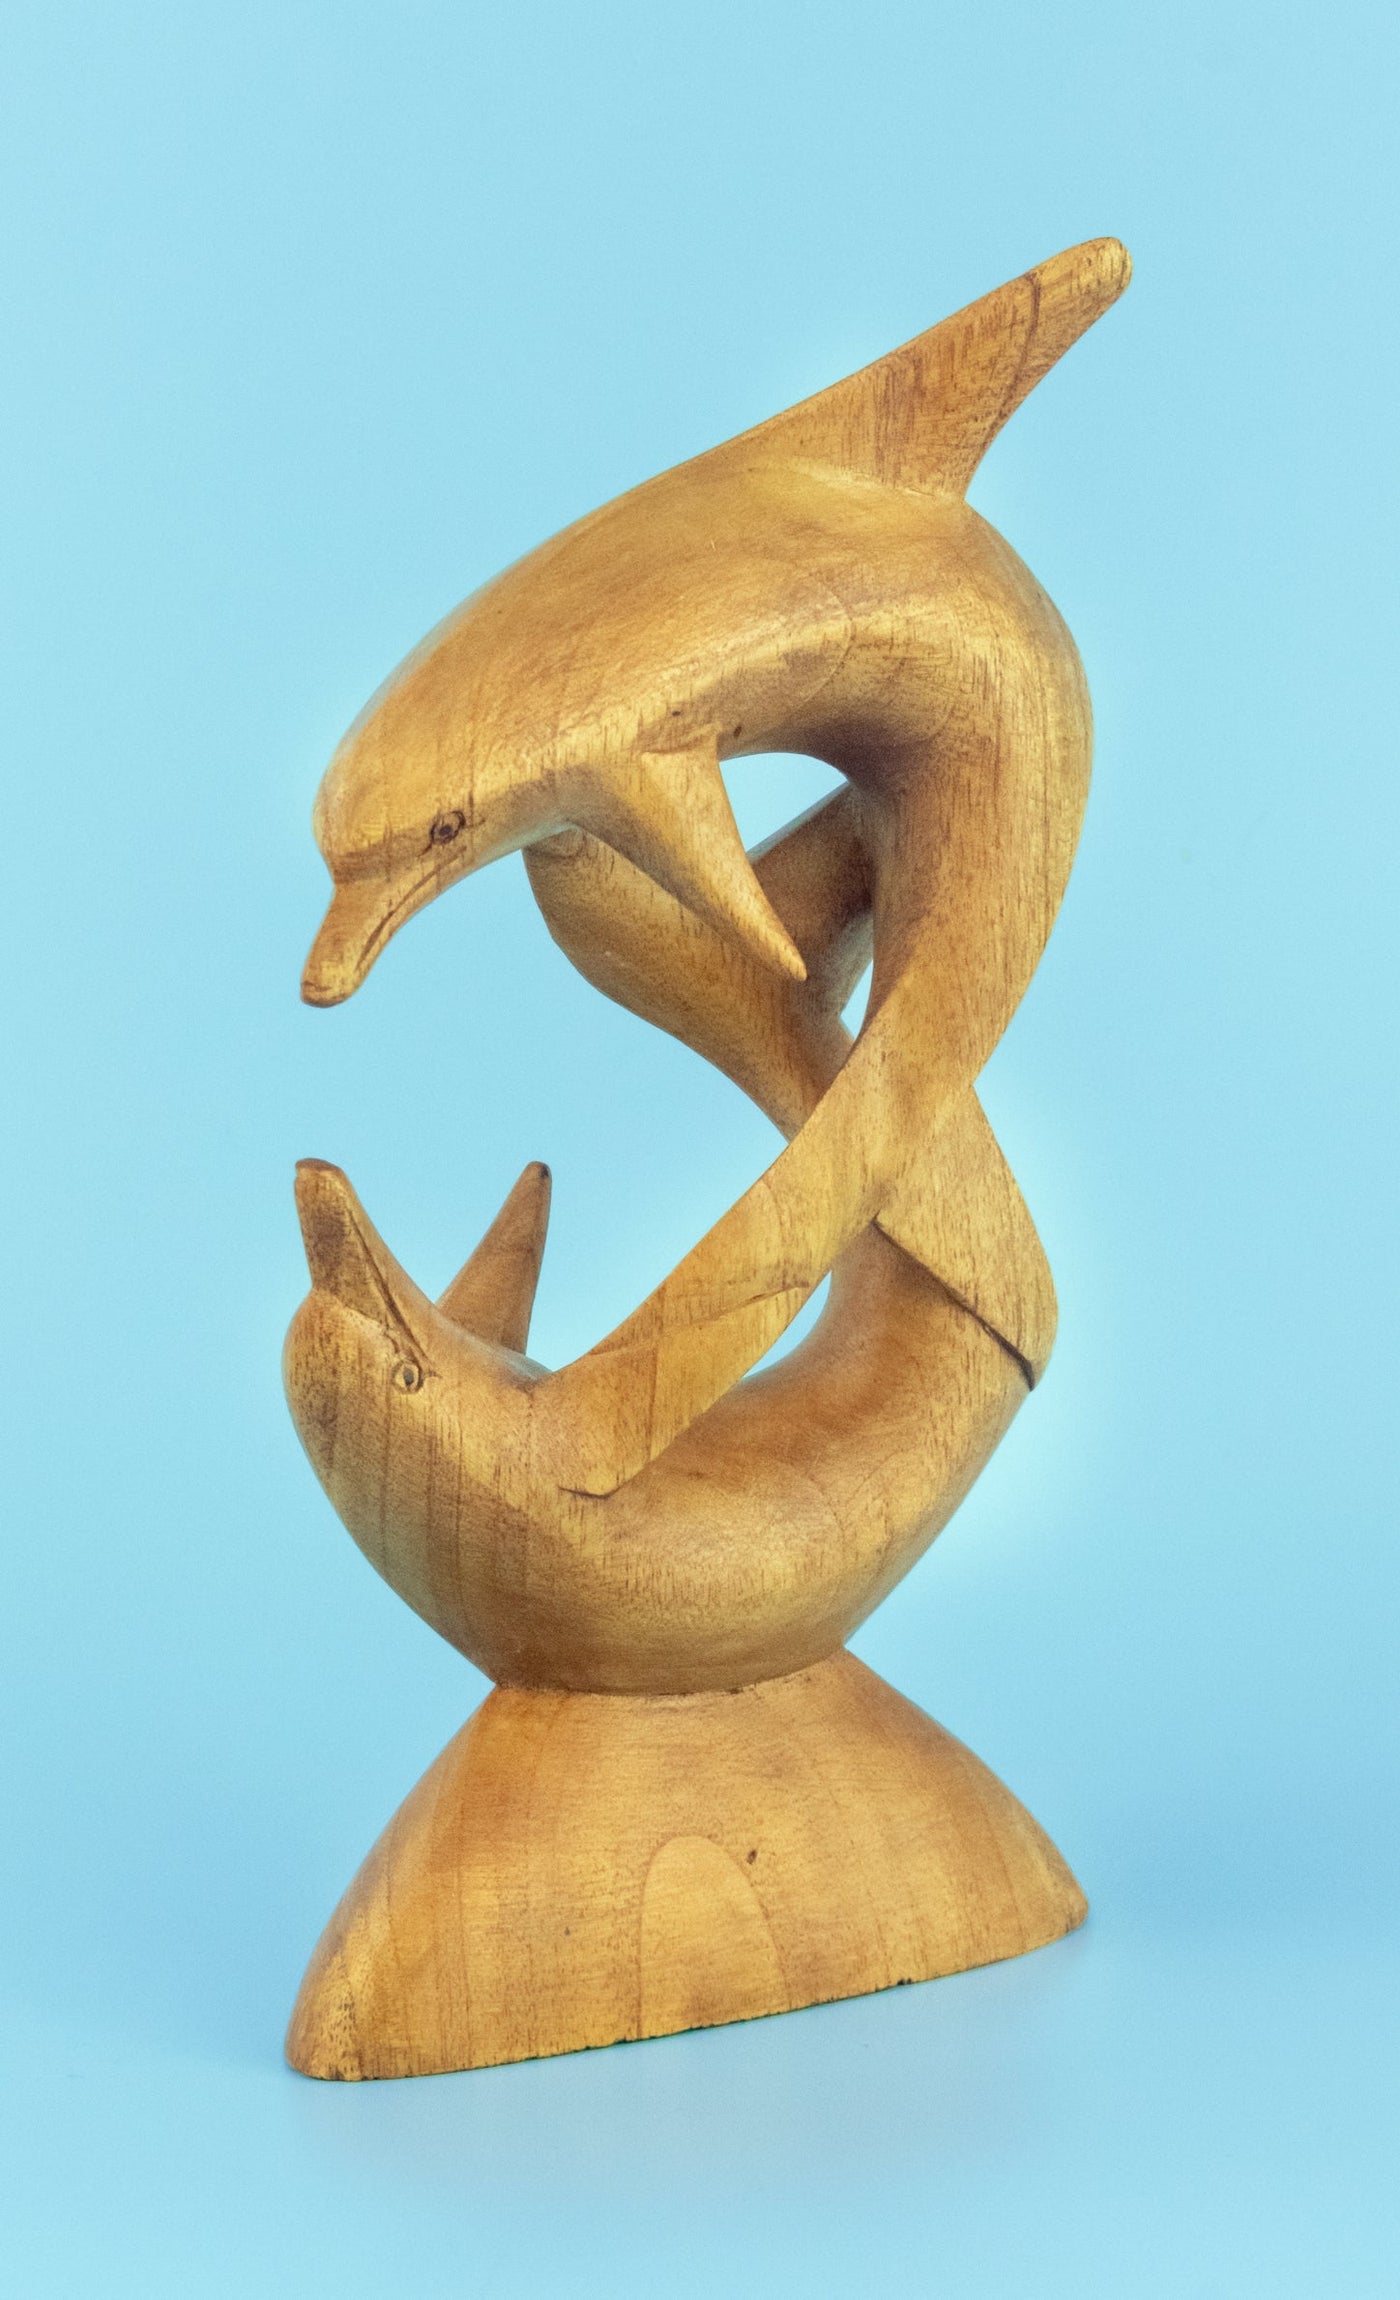 Wooden Hand Carved Two Dolphins Playing Statue Sculpture Wood Decor Accent Fish Figurine Handcrafted Handmade Seaside Tropical Nautical Ocean Coastal